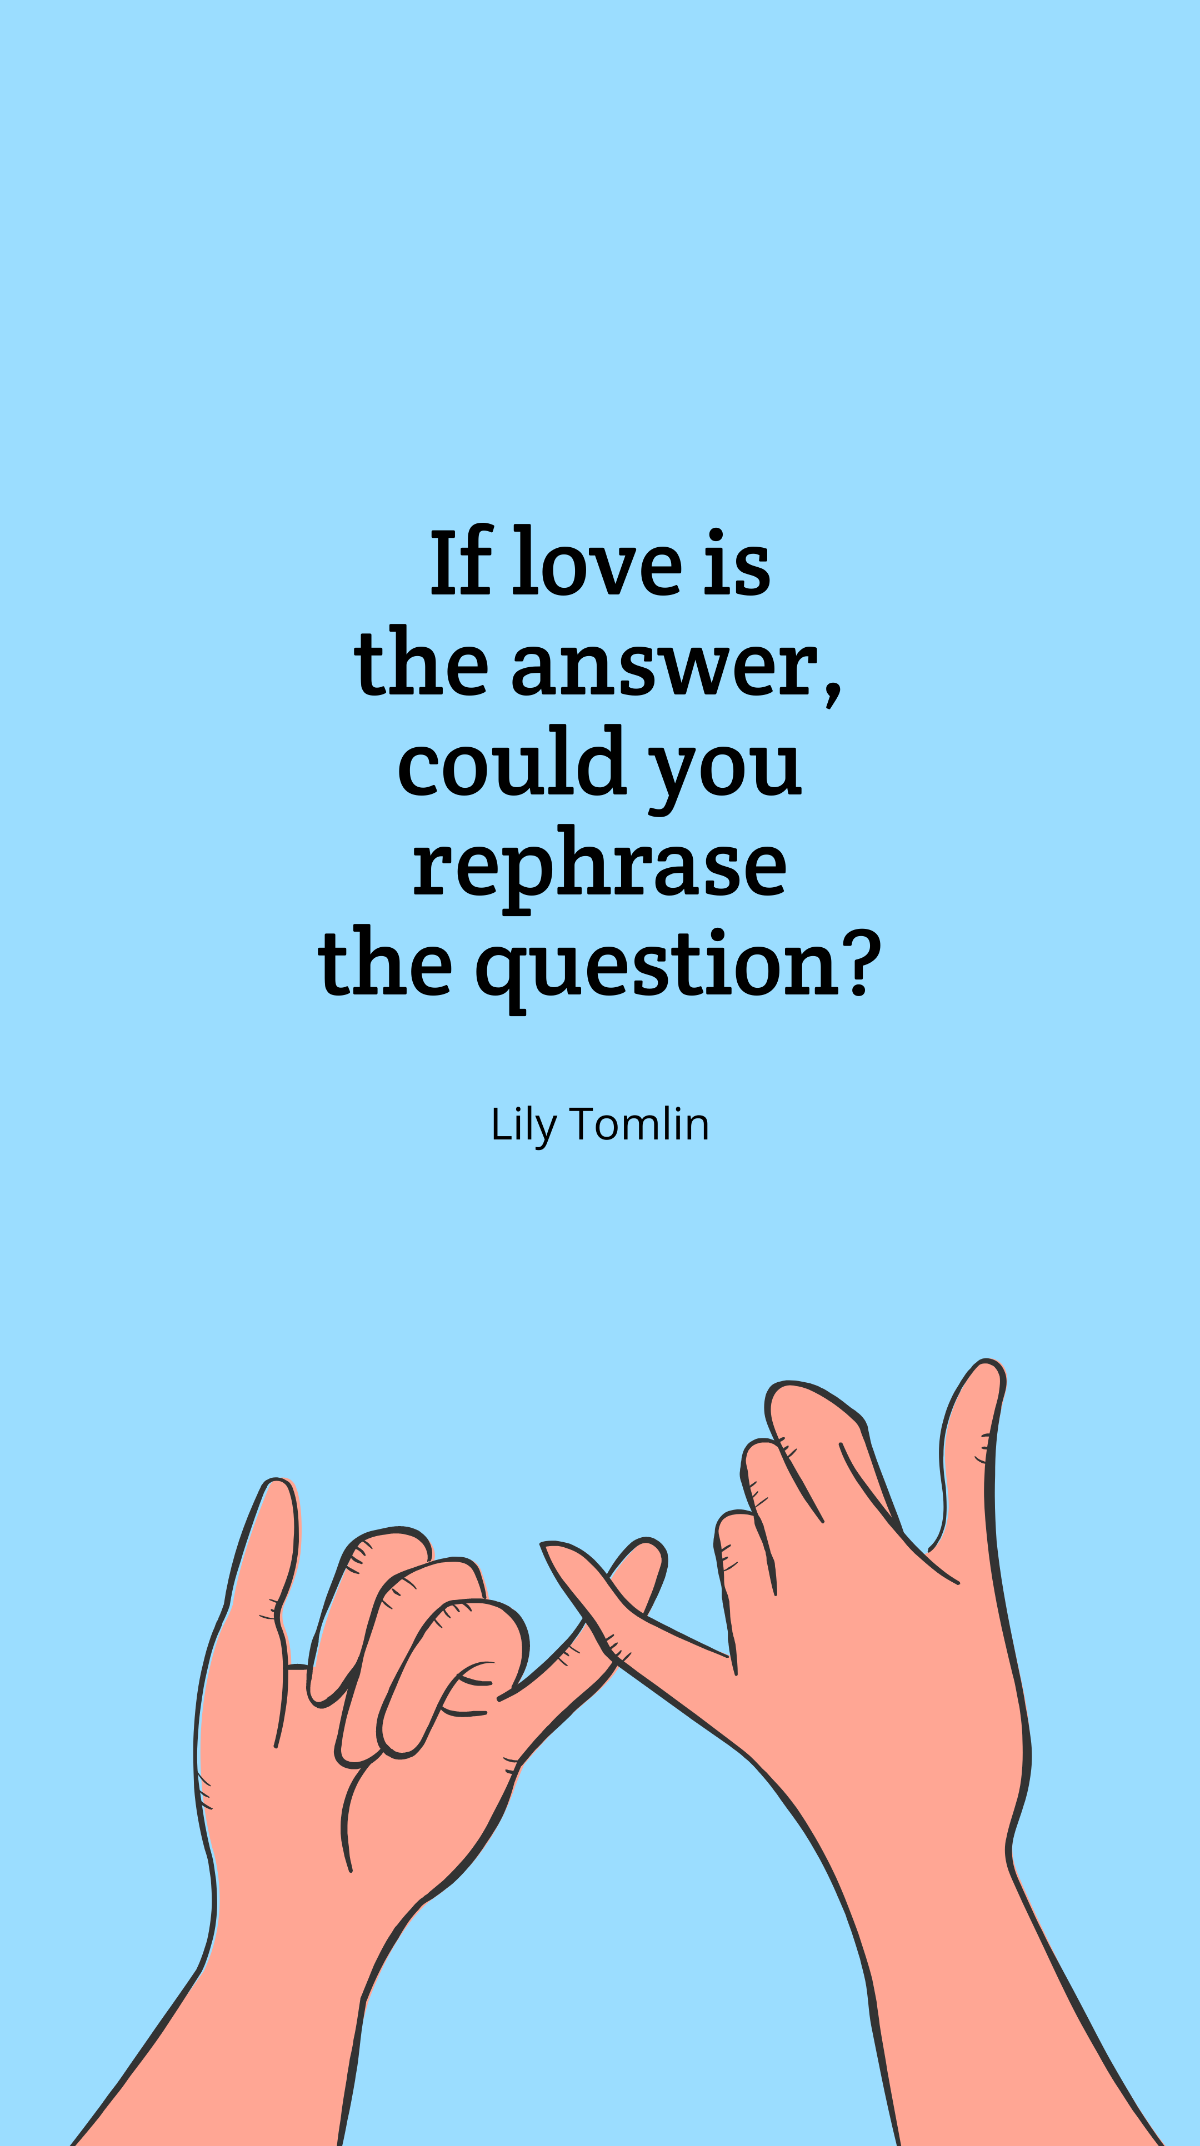 Lily Tomlin - “If love is the answer, could you rephrase the question?” Template